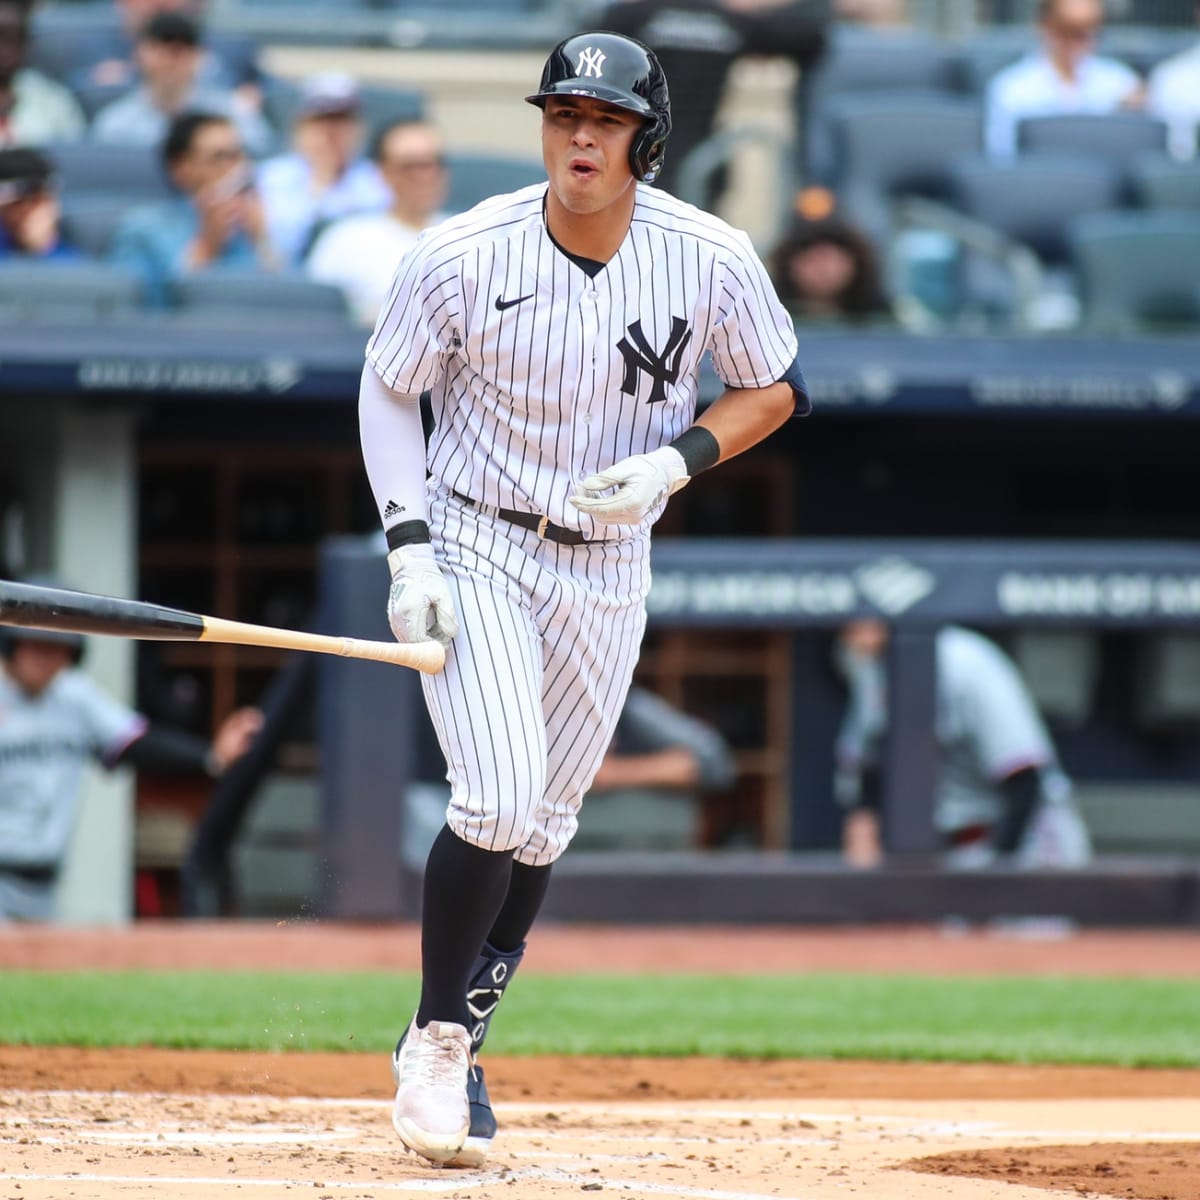 WATCH: New York Yankees' Anthony Volpe Hits Go-Ahead HR vs. Blue